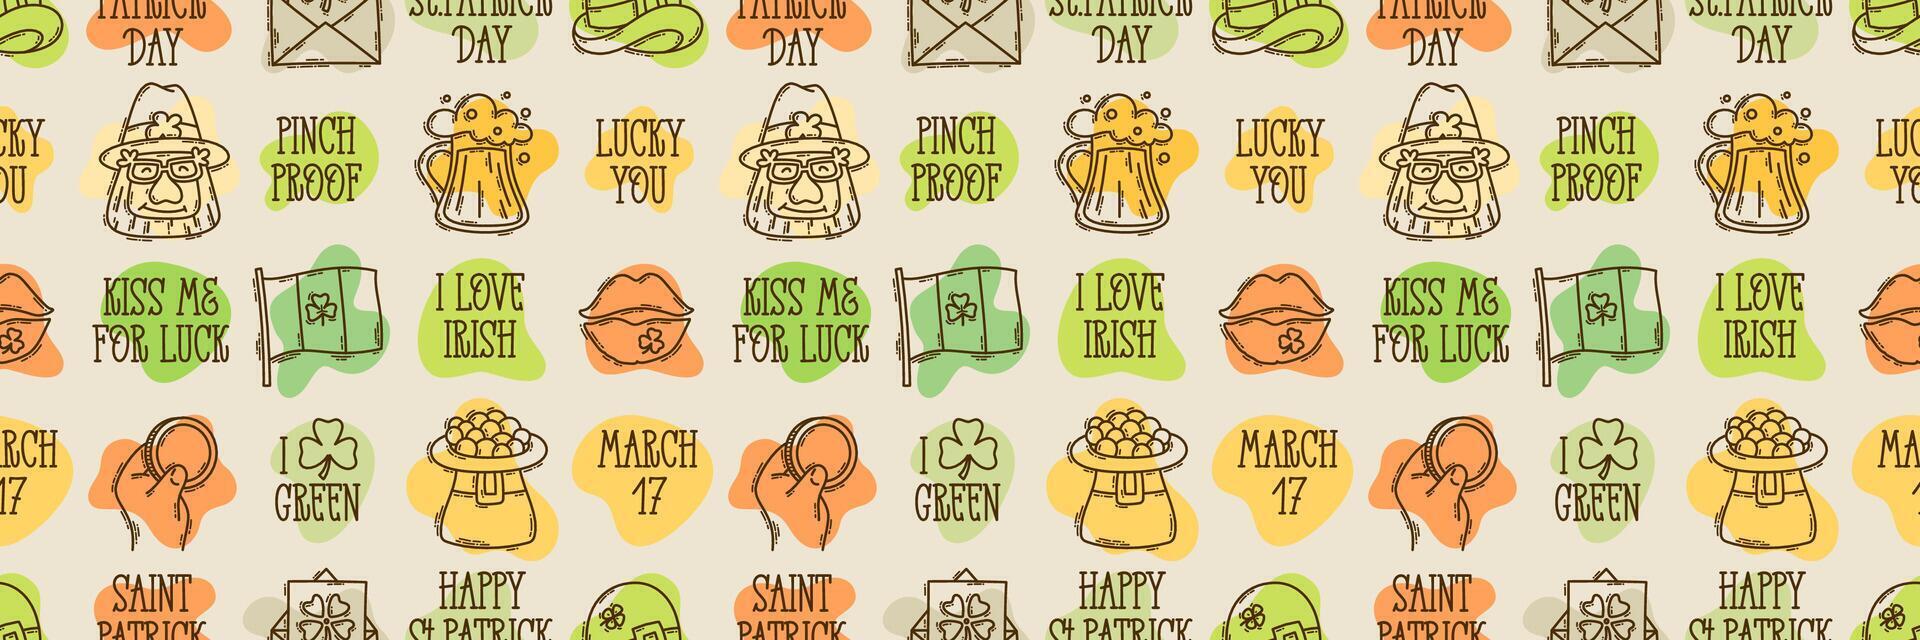 St Patricks Day funny seamless pattern light background quotes and cute hand-drawn Irish holiday icons, symbols, and elements. vector